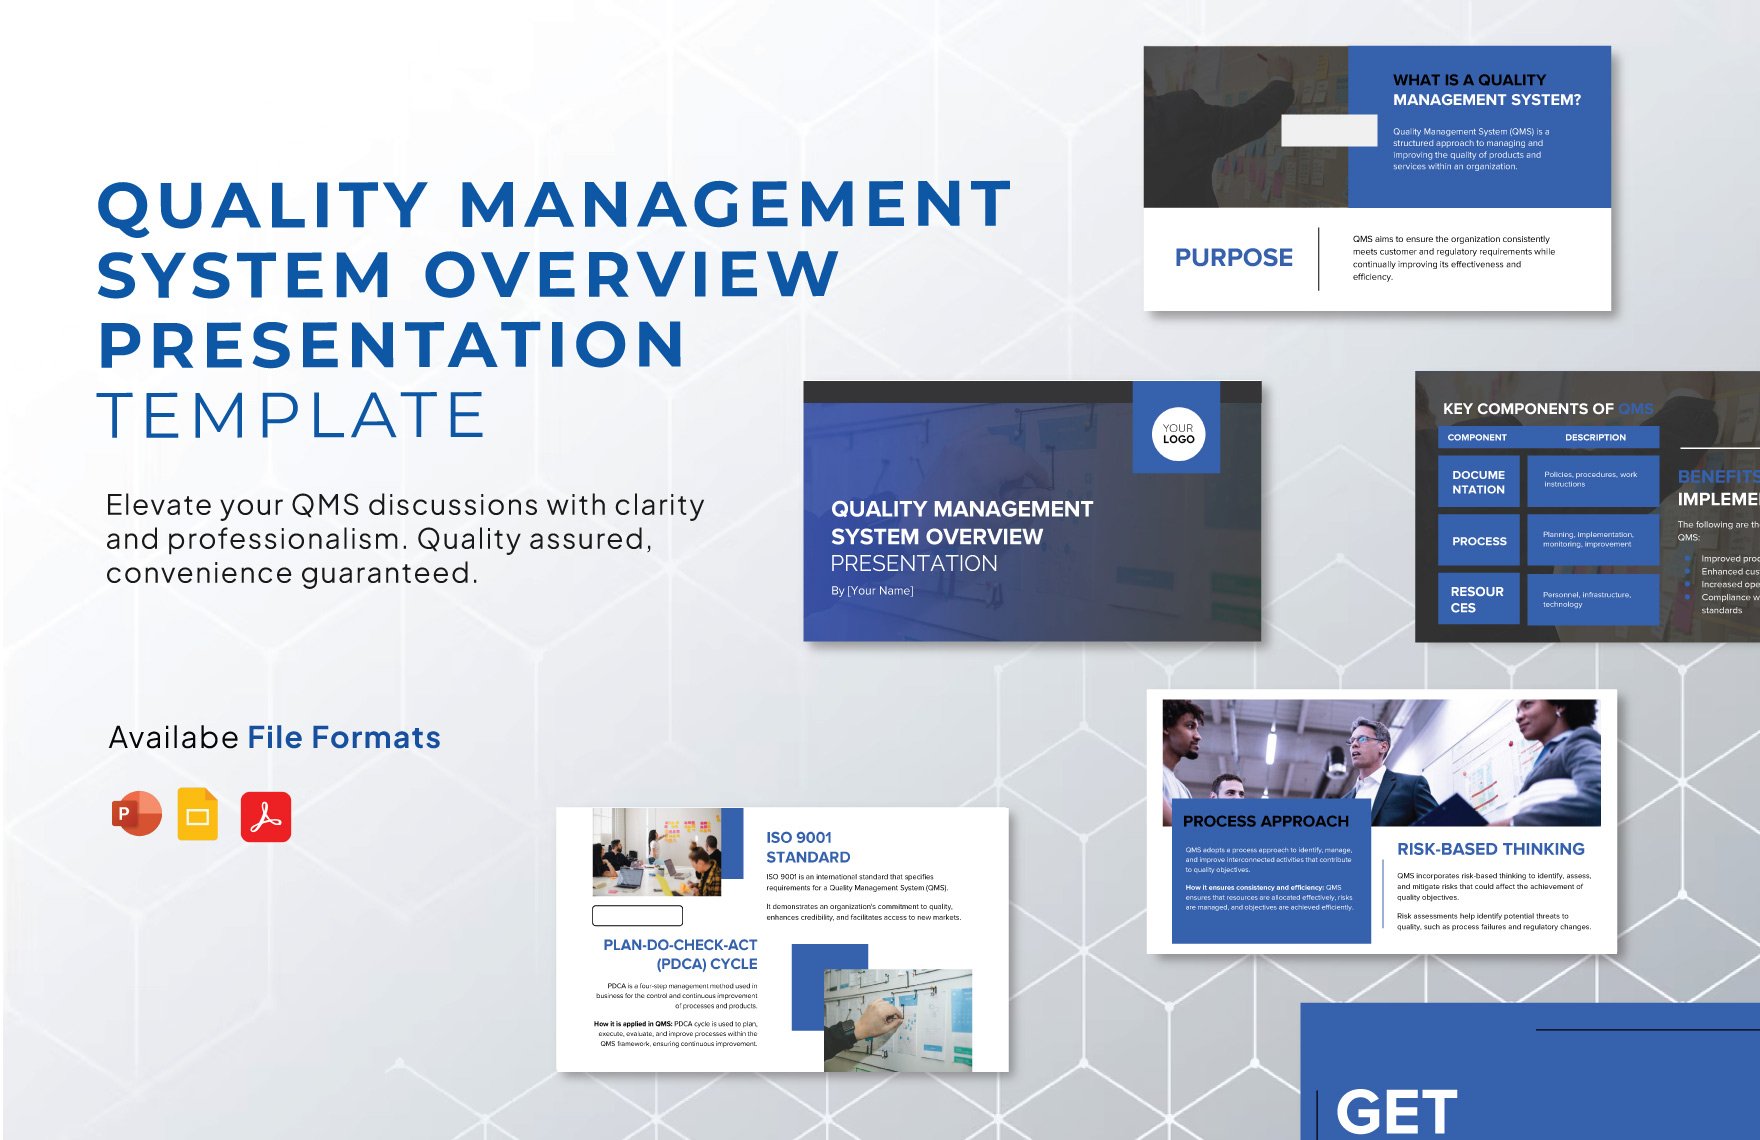 Free Quality Management System Overview Presentation Template in PDF, PowerPoint, Google Slides